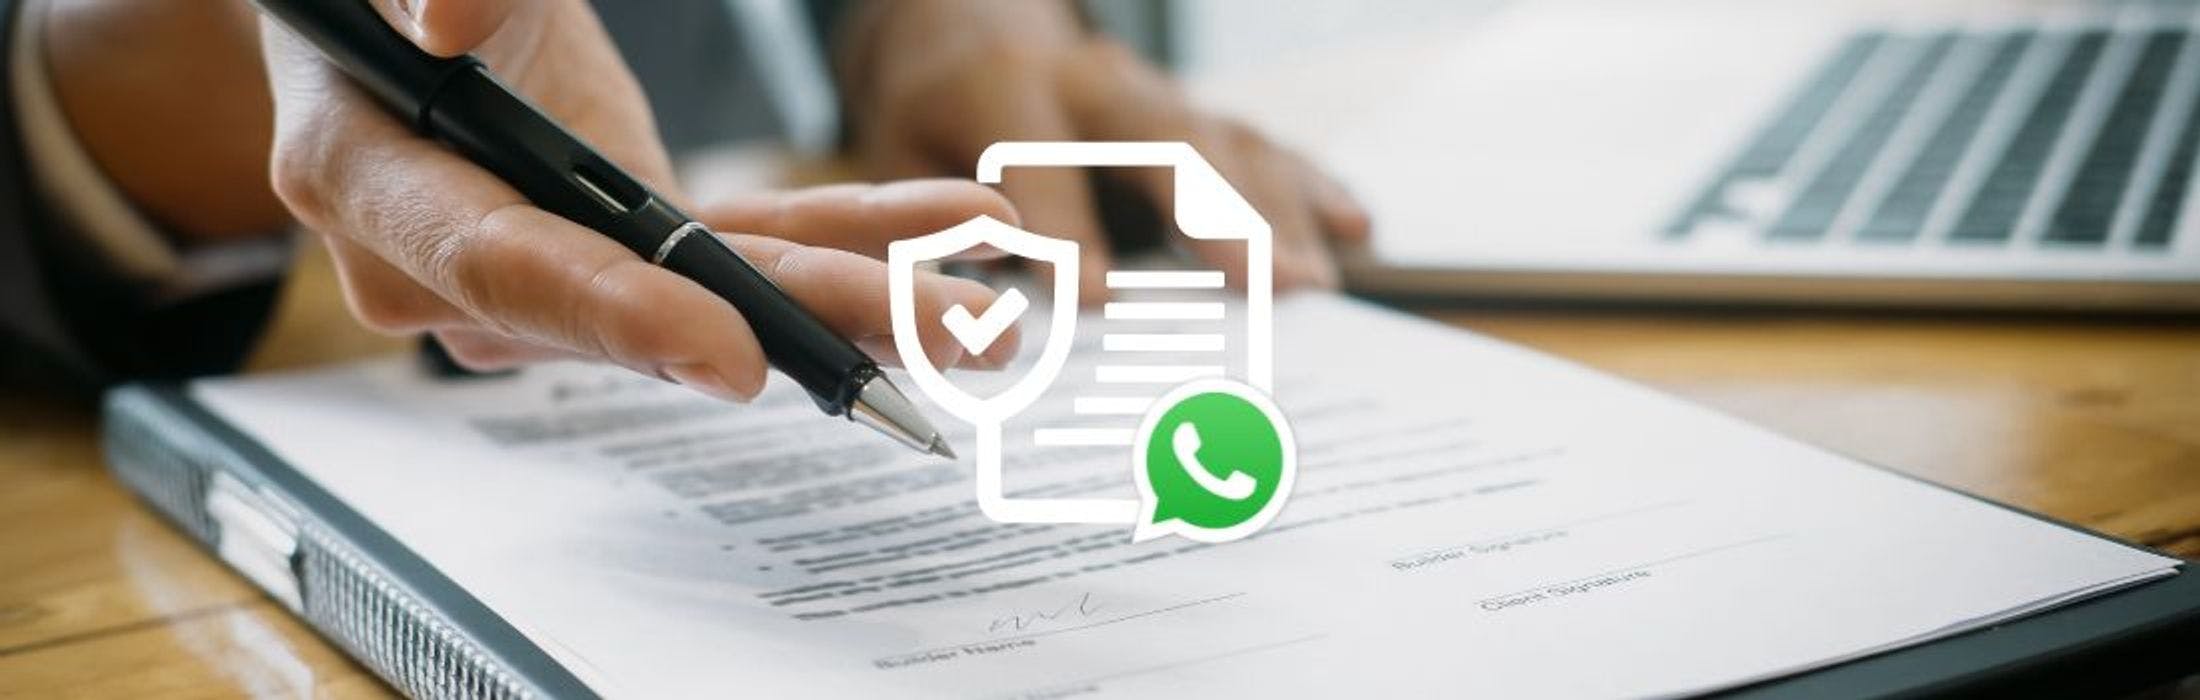 How To Comply With The WhatsApp Commerce Policy